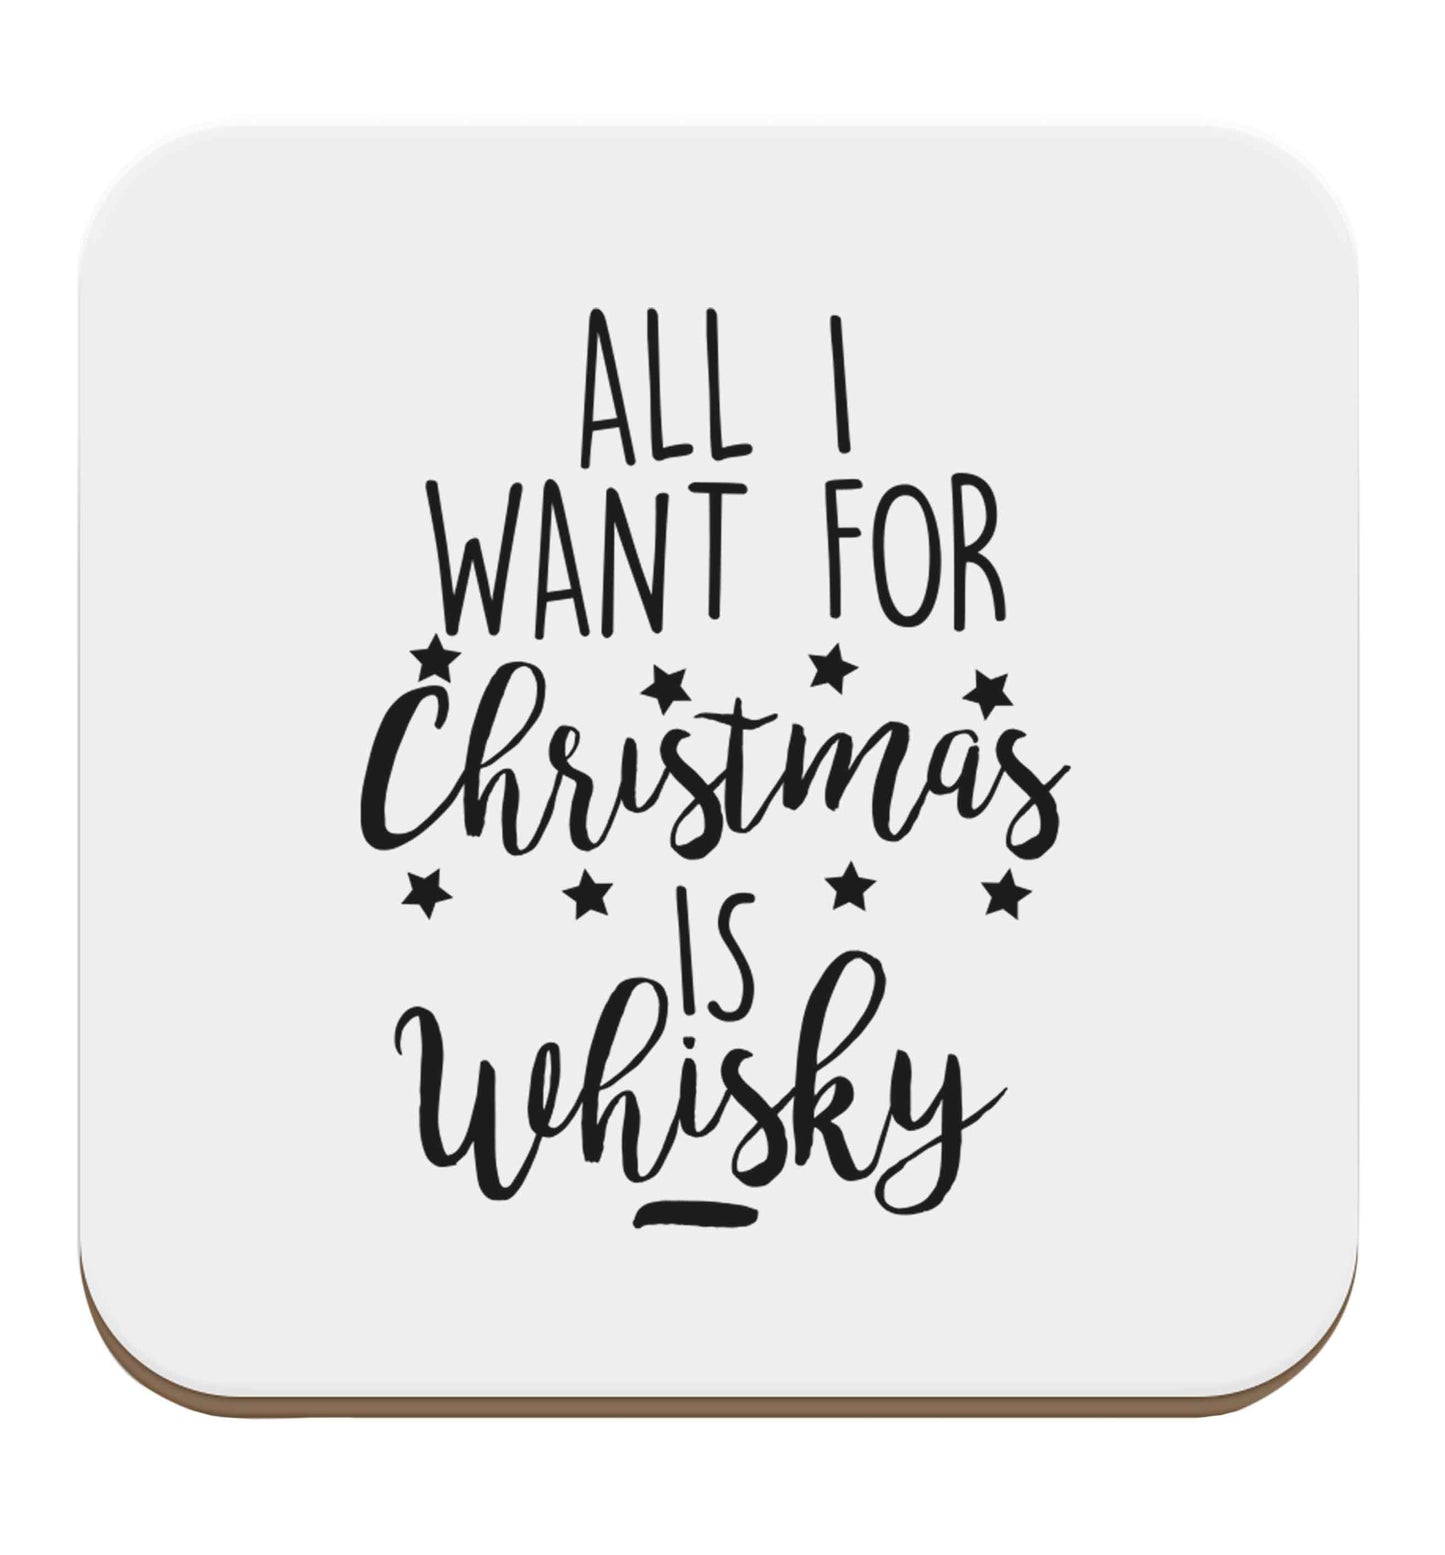 All I want for Christmas is whisky set of four coasters